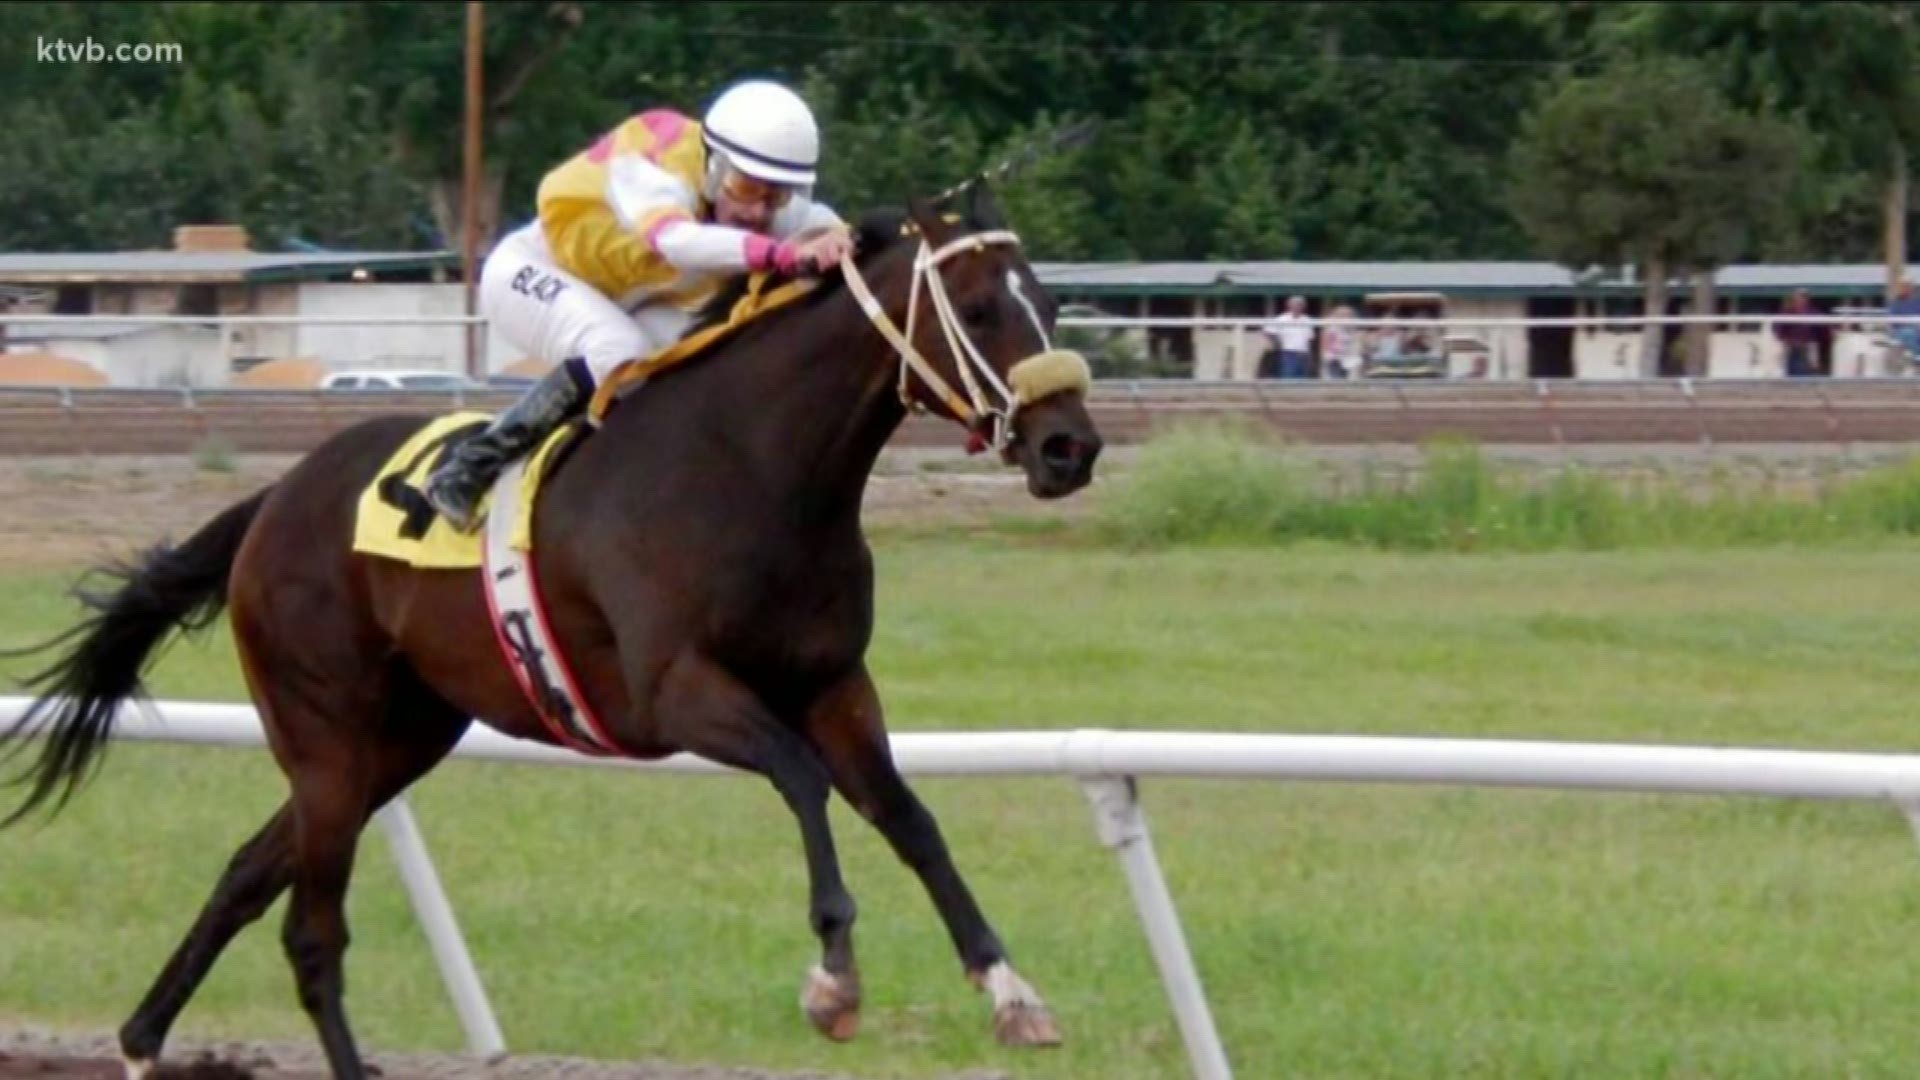 Nikeela Black was thrown from her horse during a race Sunday at the Eastern Idaho State Fair.